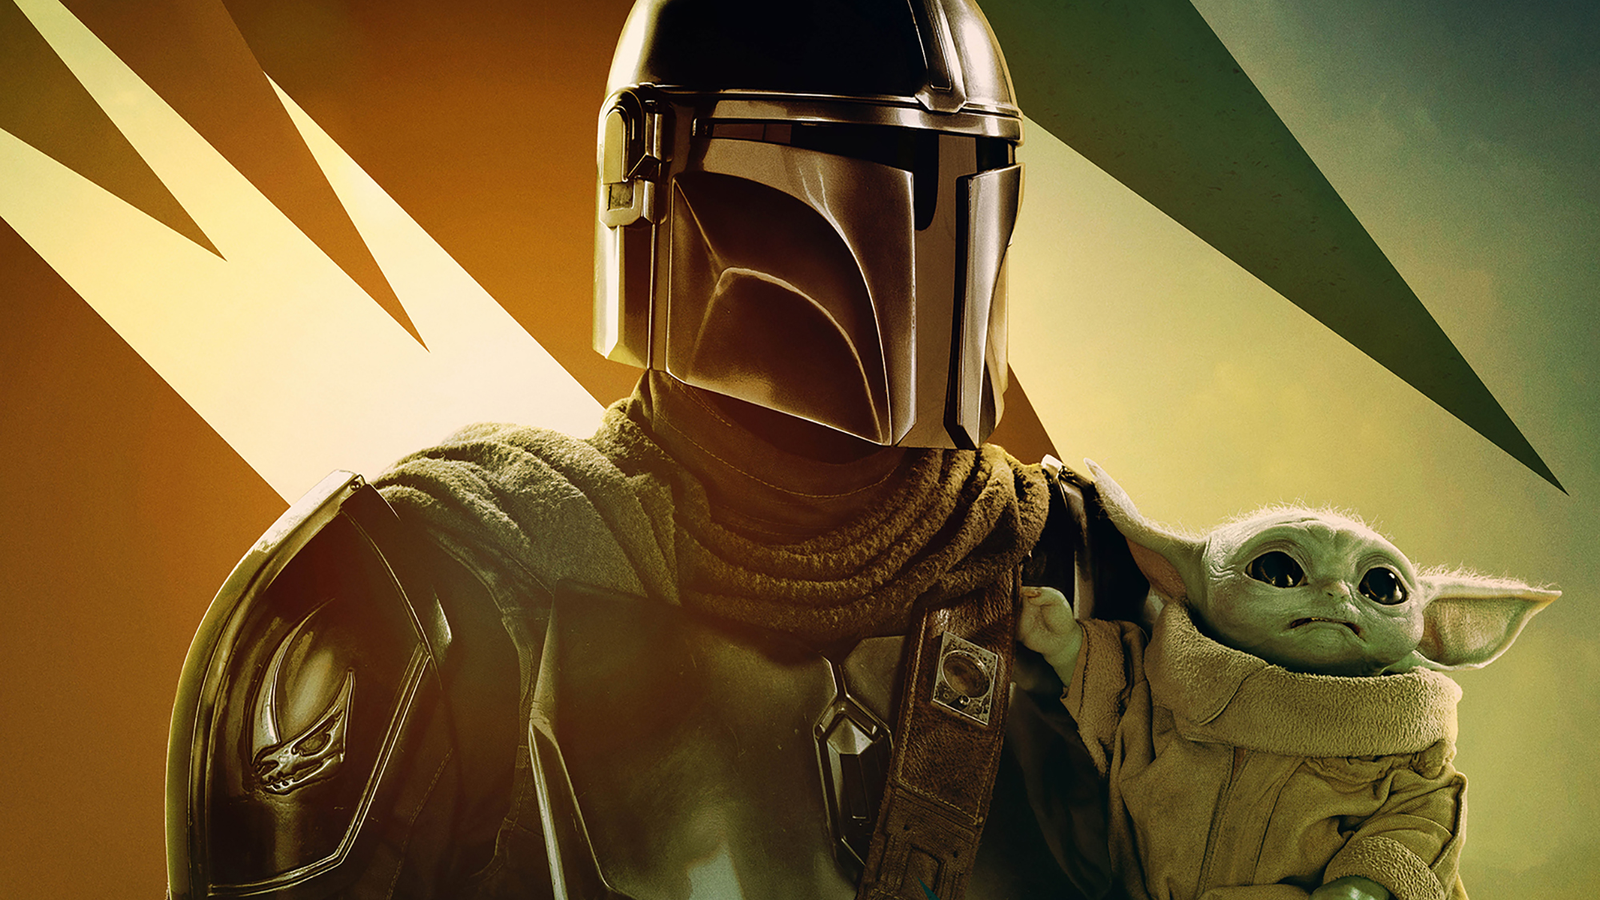 Mandalorian Season 3: Everything we know about the upcoming Star Wars show  on Disney+